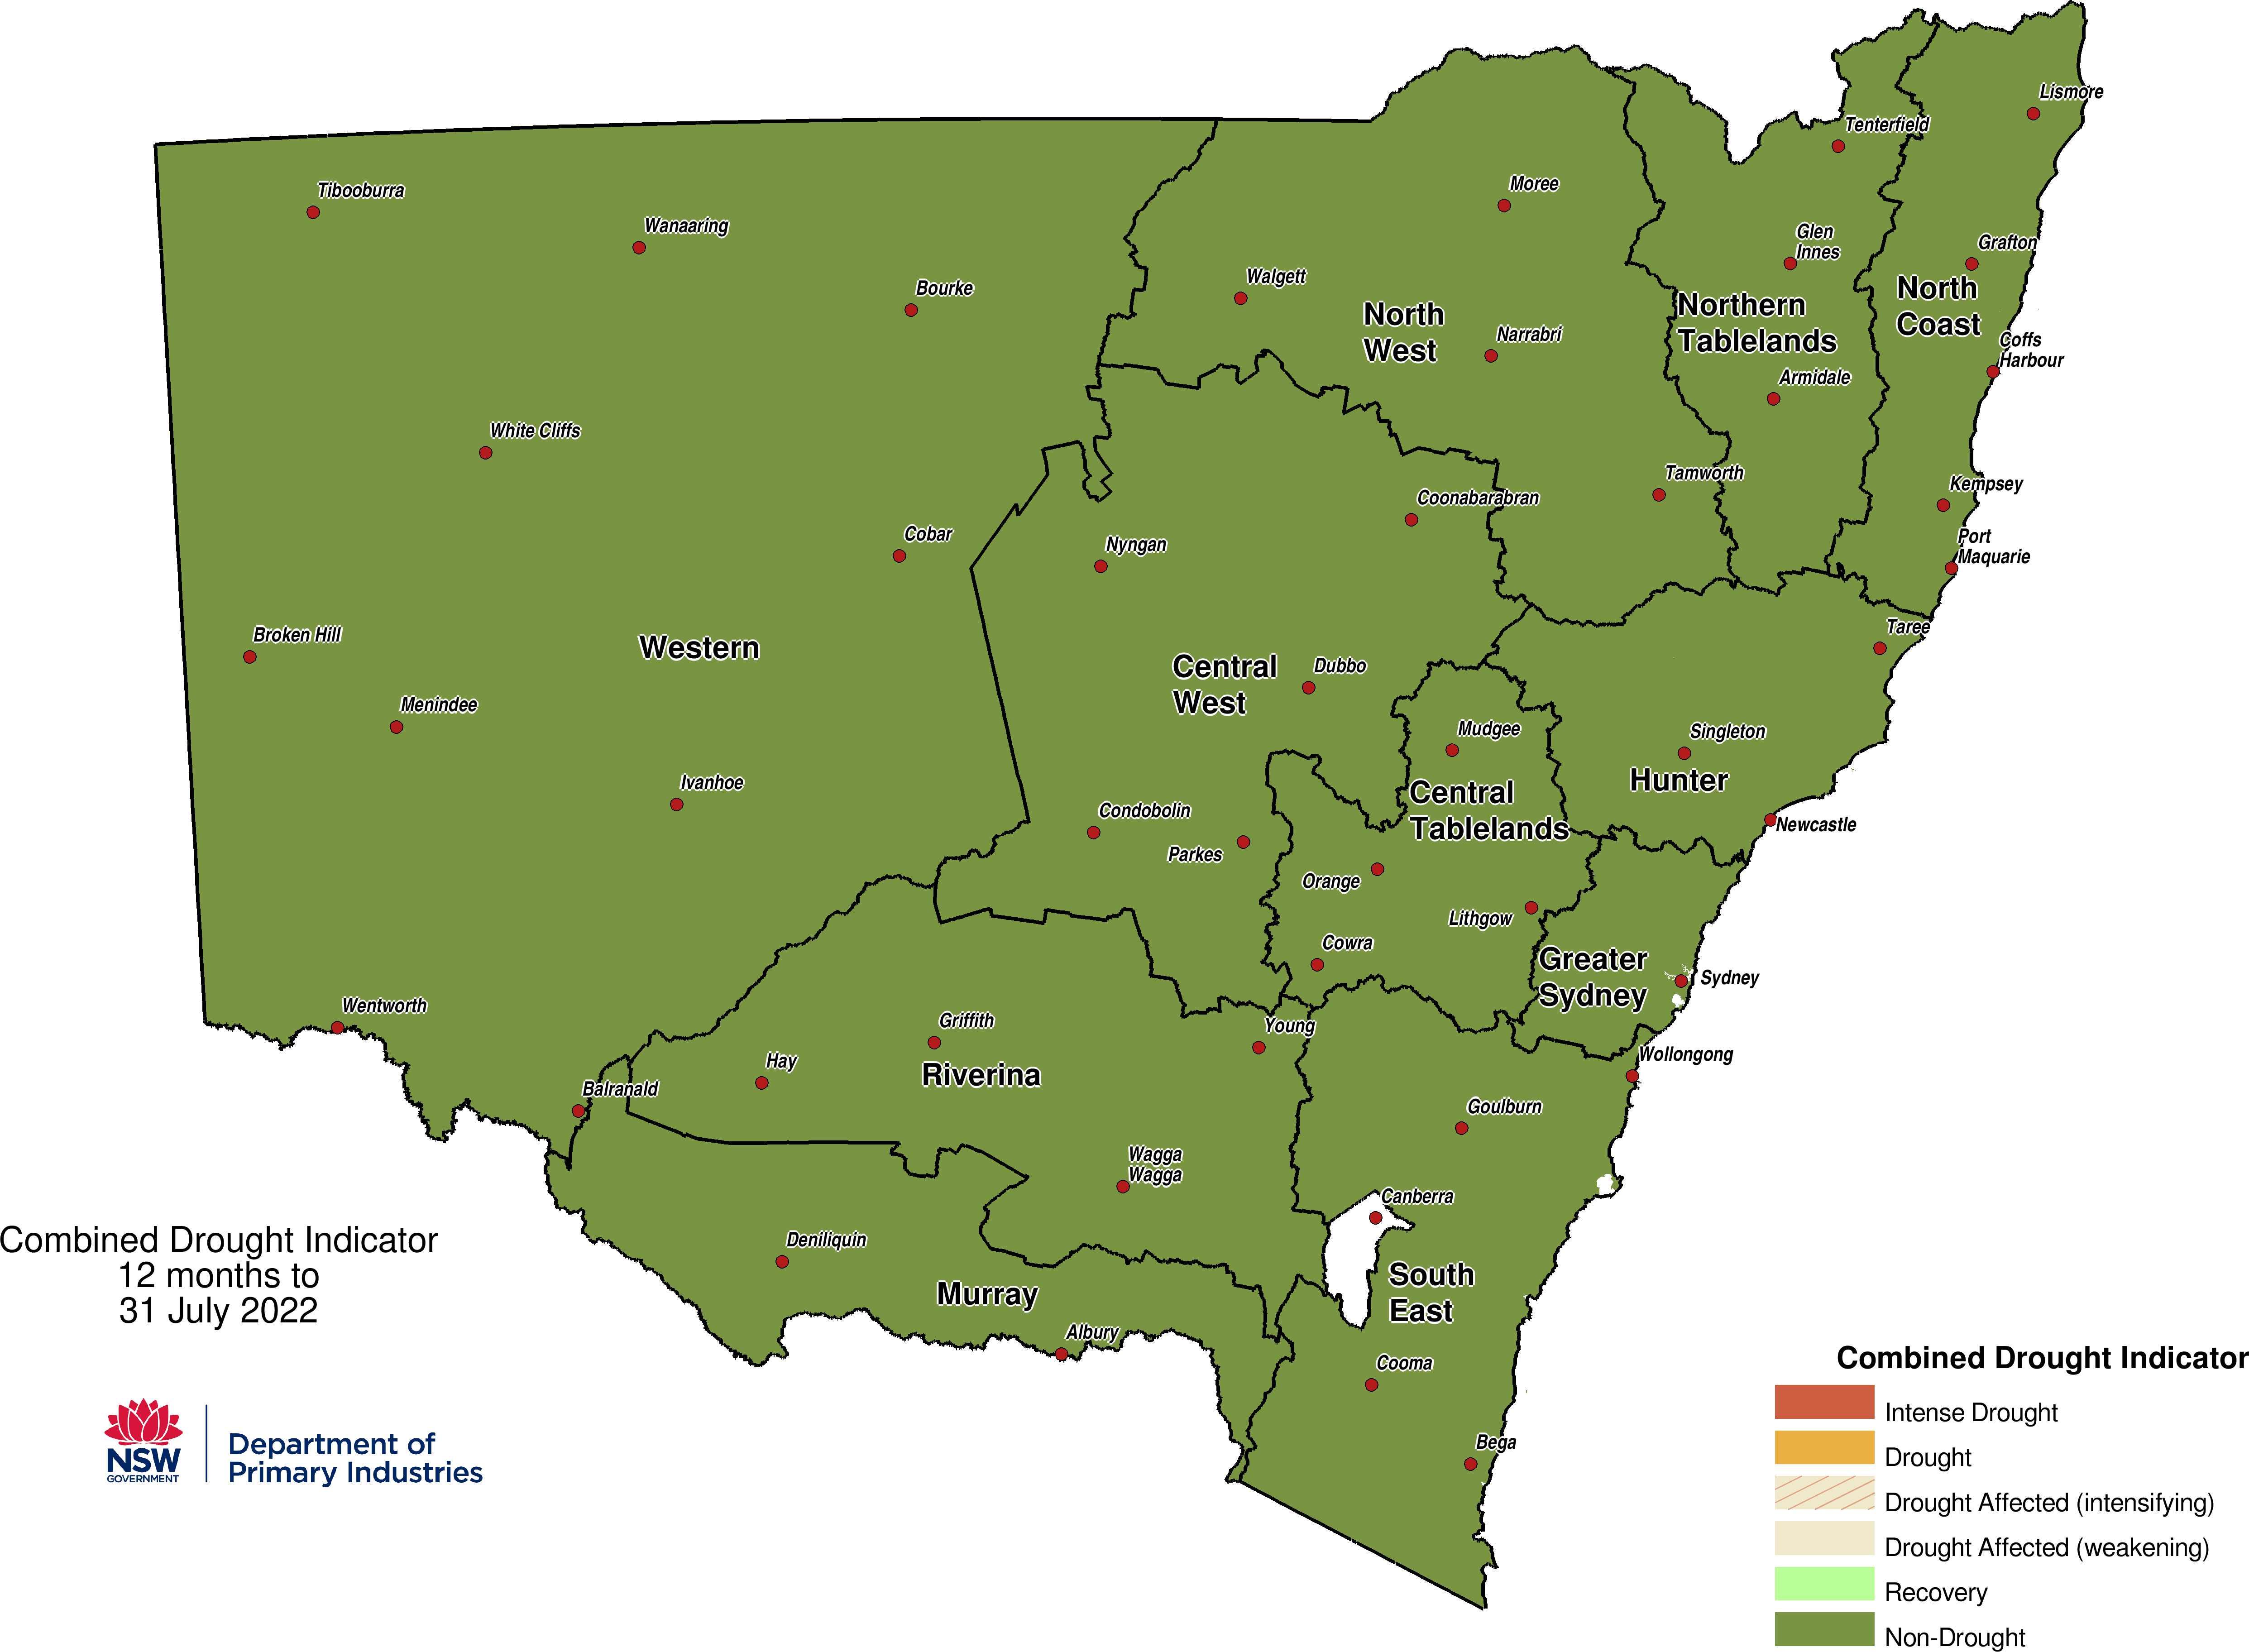 Figure 1. Verified NSW Combined Drought Indicator to 31 July 2022